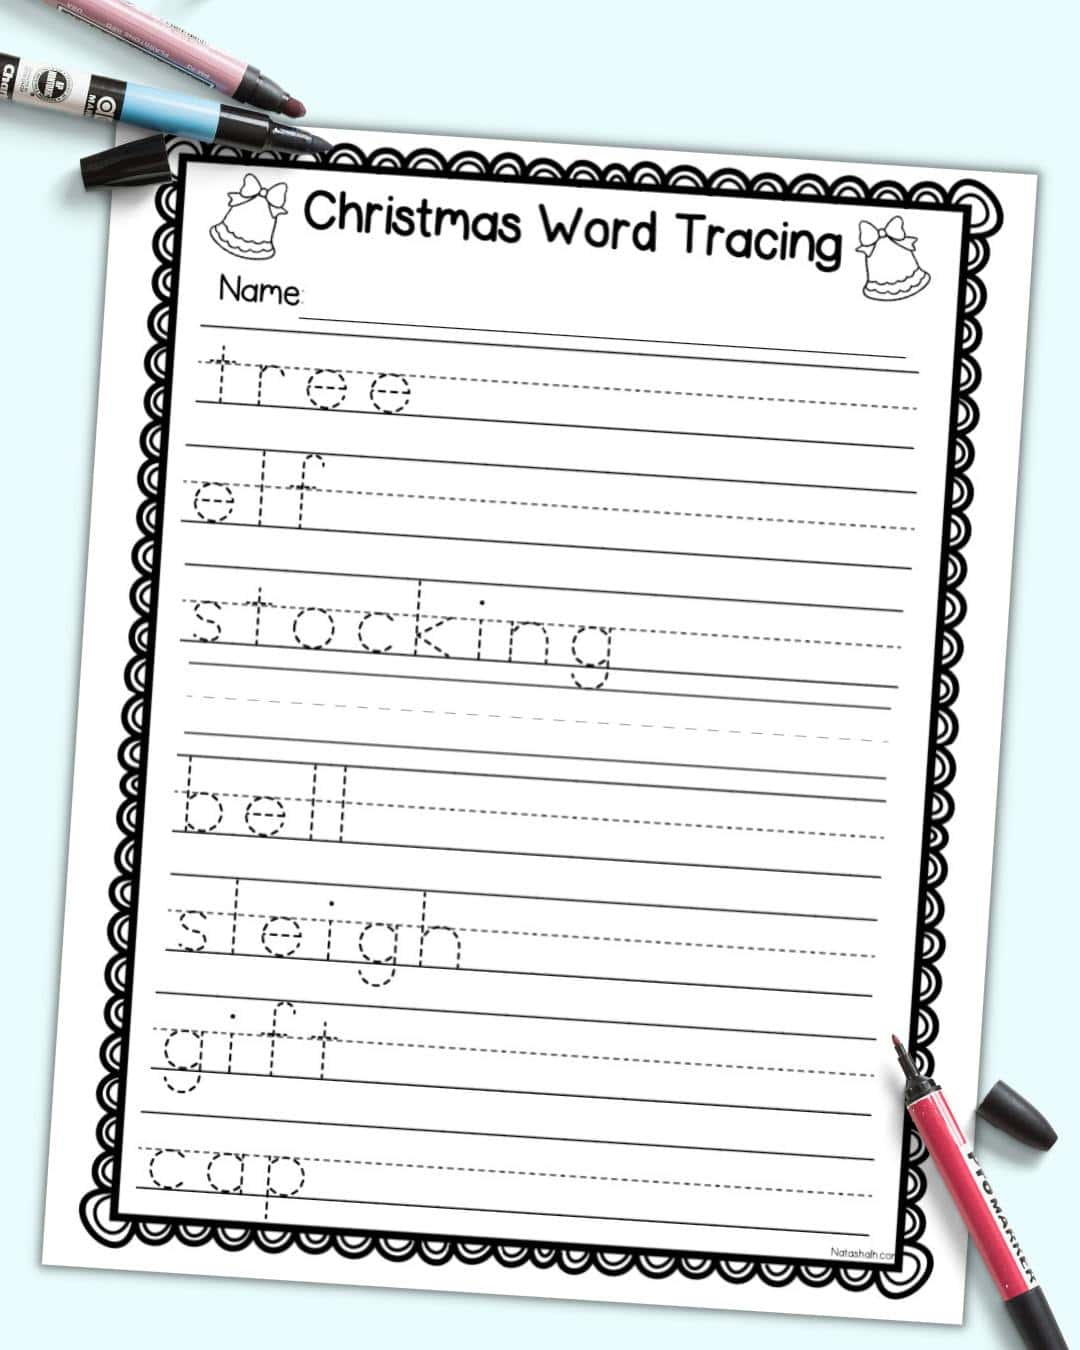 A preview of a Christmas word tracing worksheet with seven words in a dotted font to trace